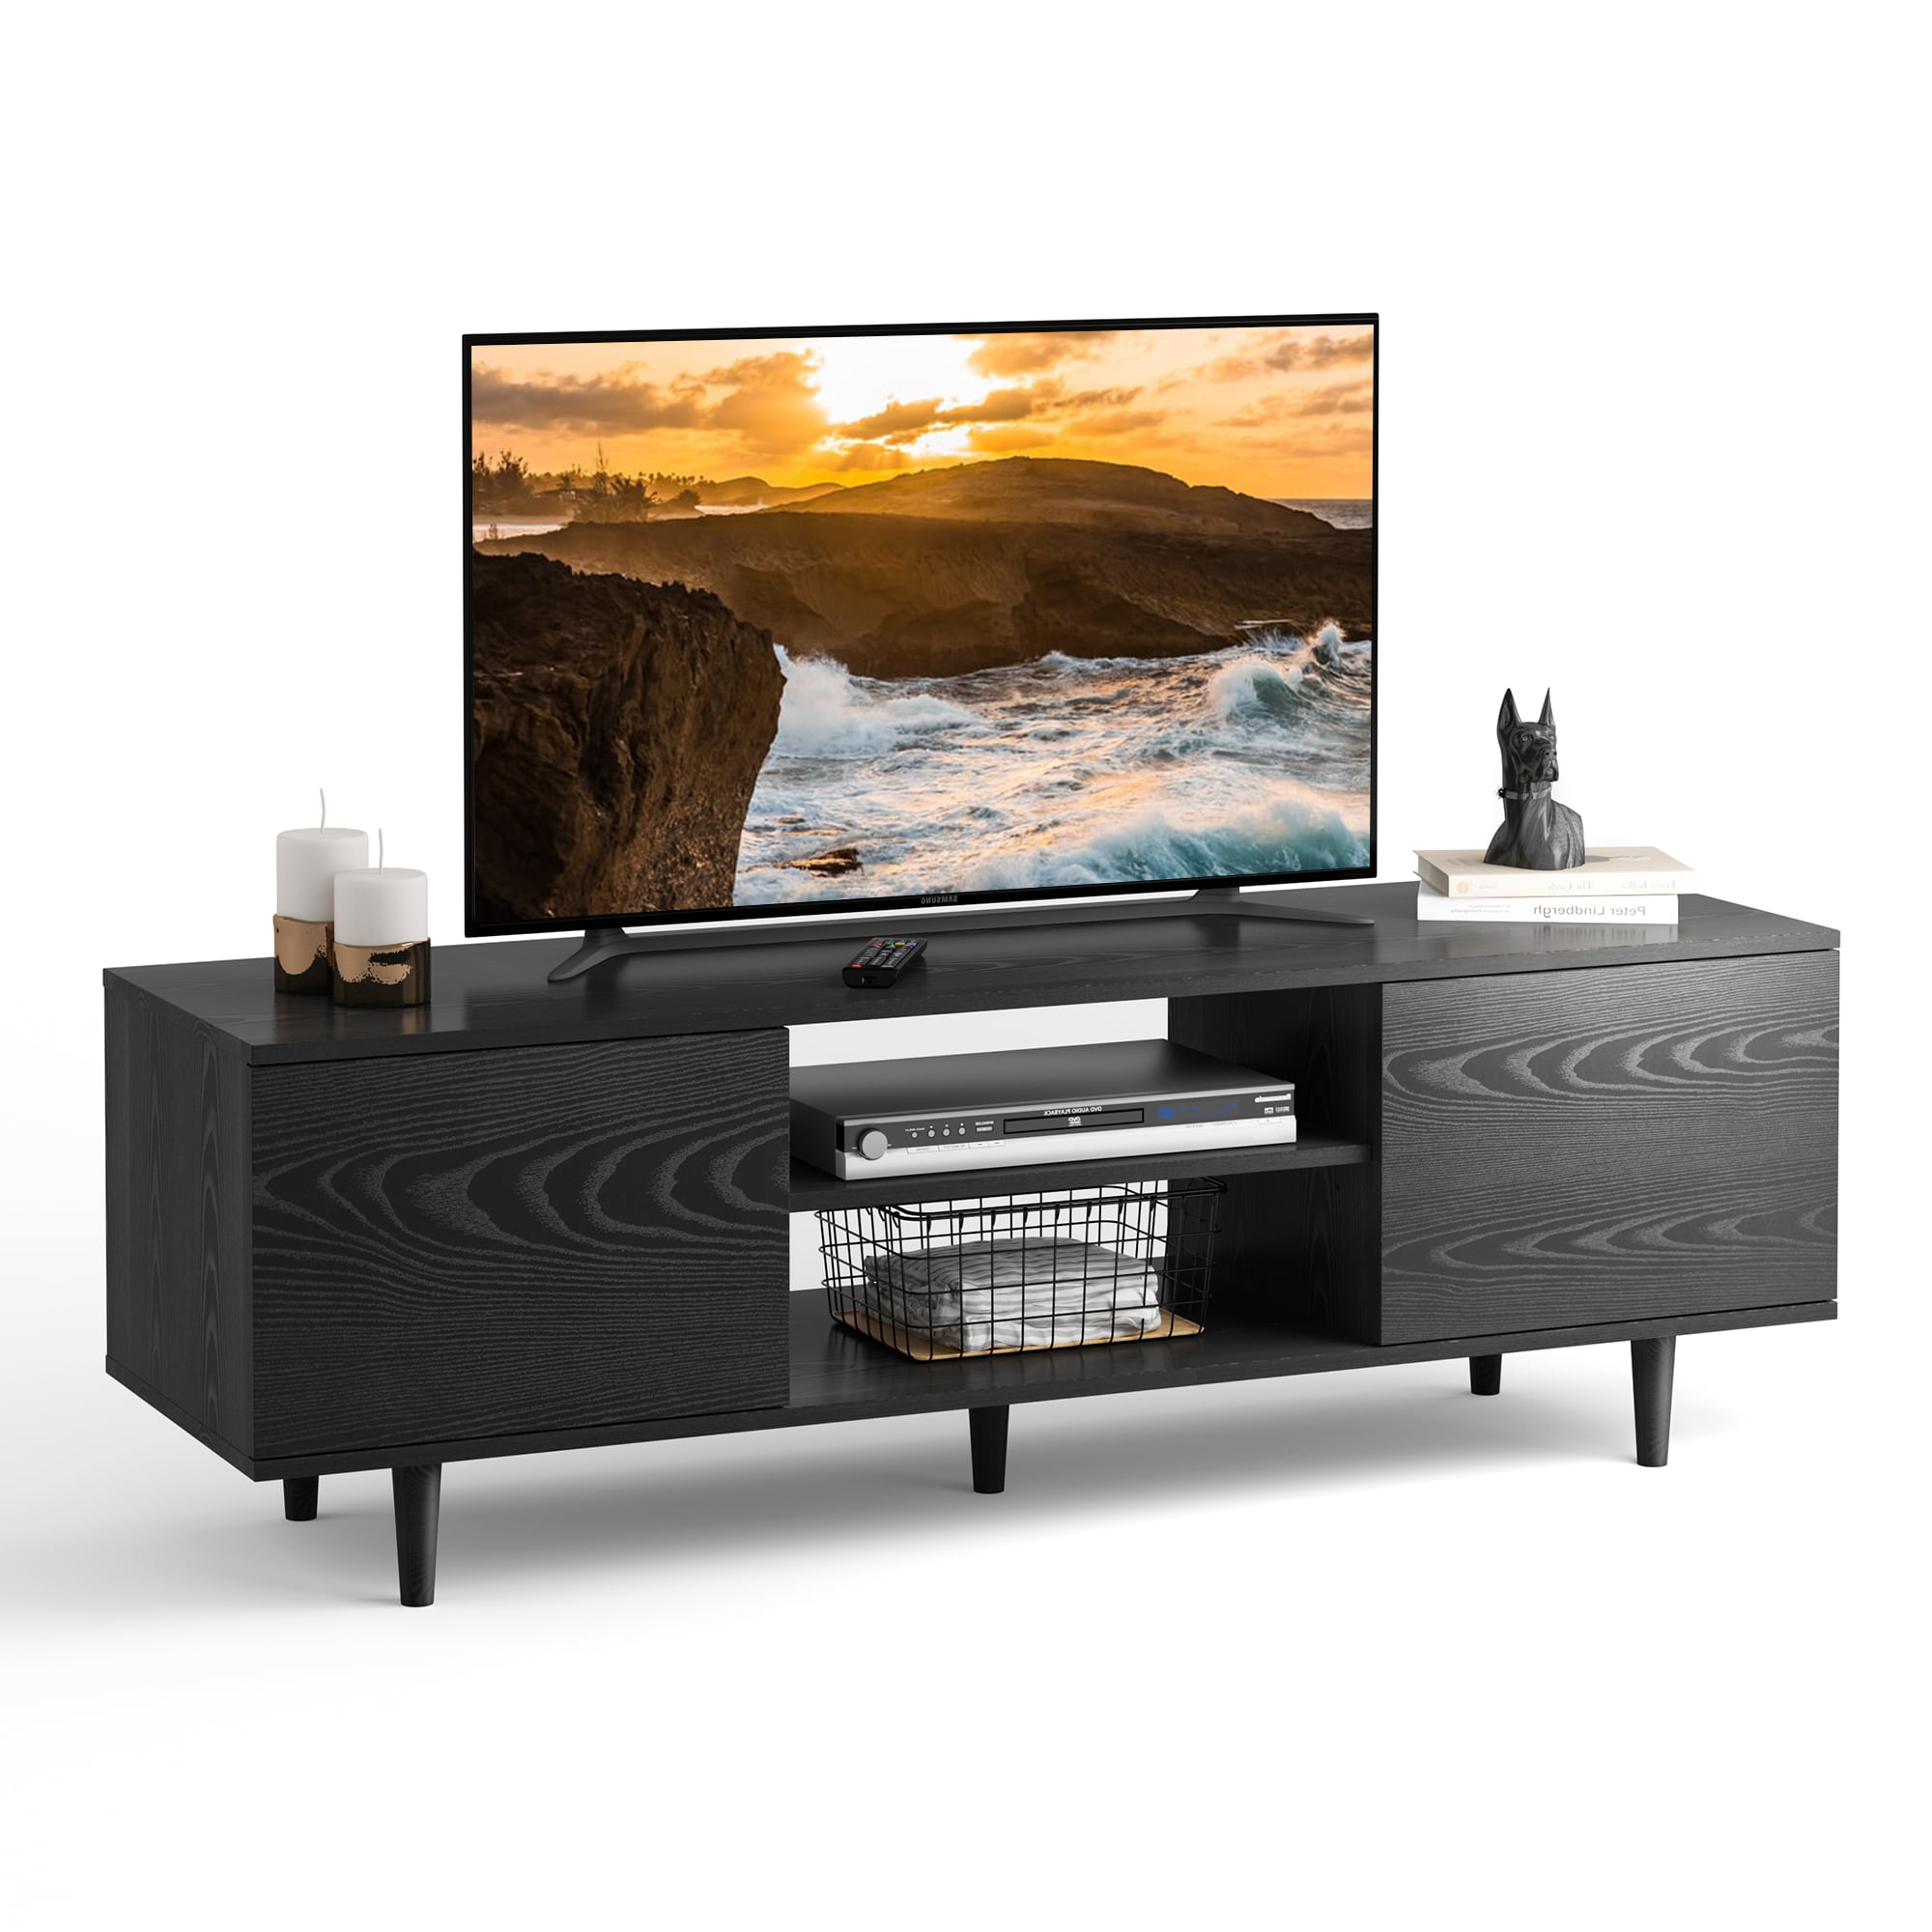 Wlive Tv Stand For 55 50 Inch Flat Screen Tv